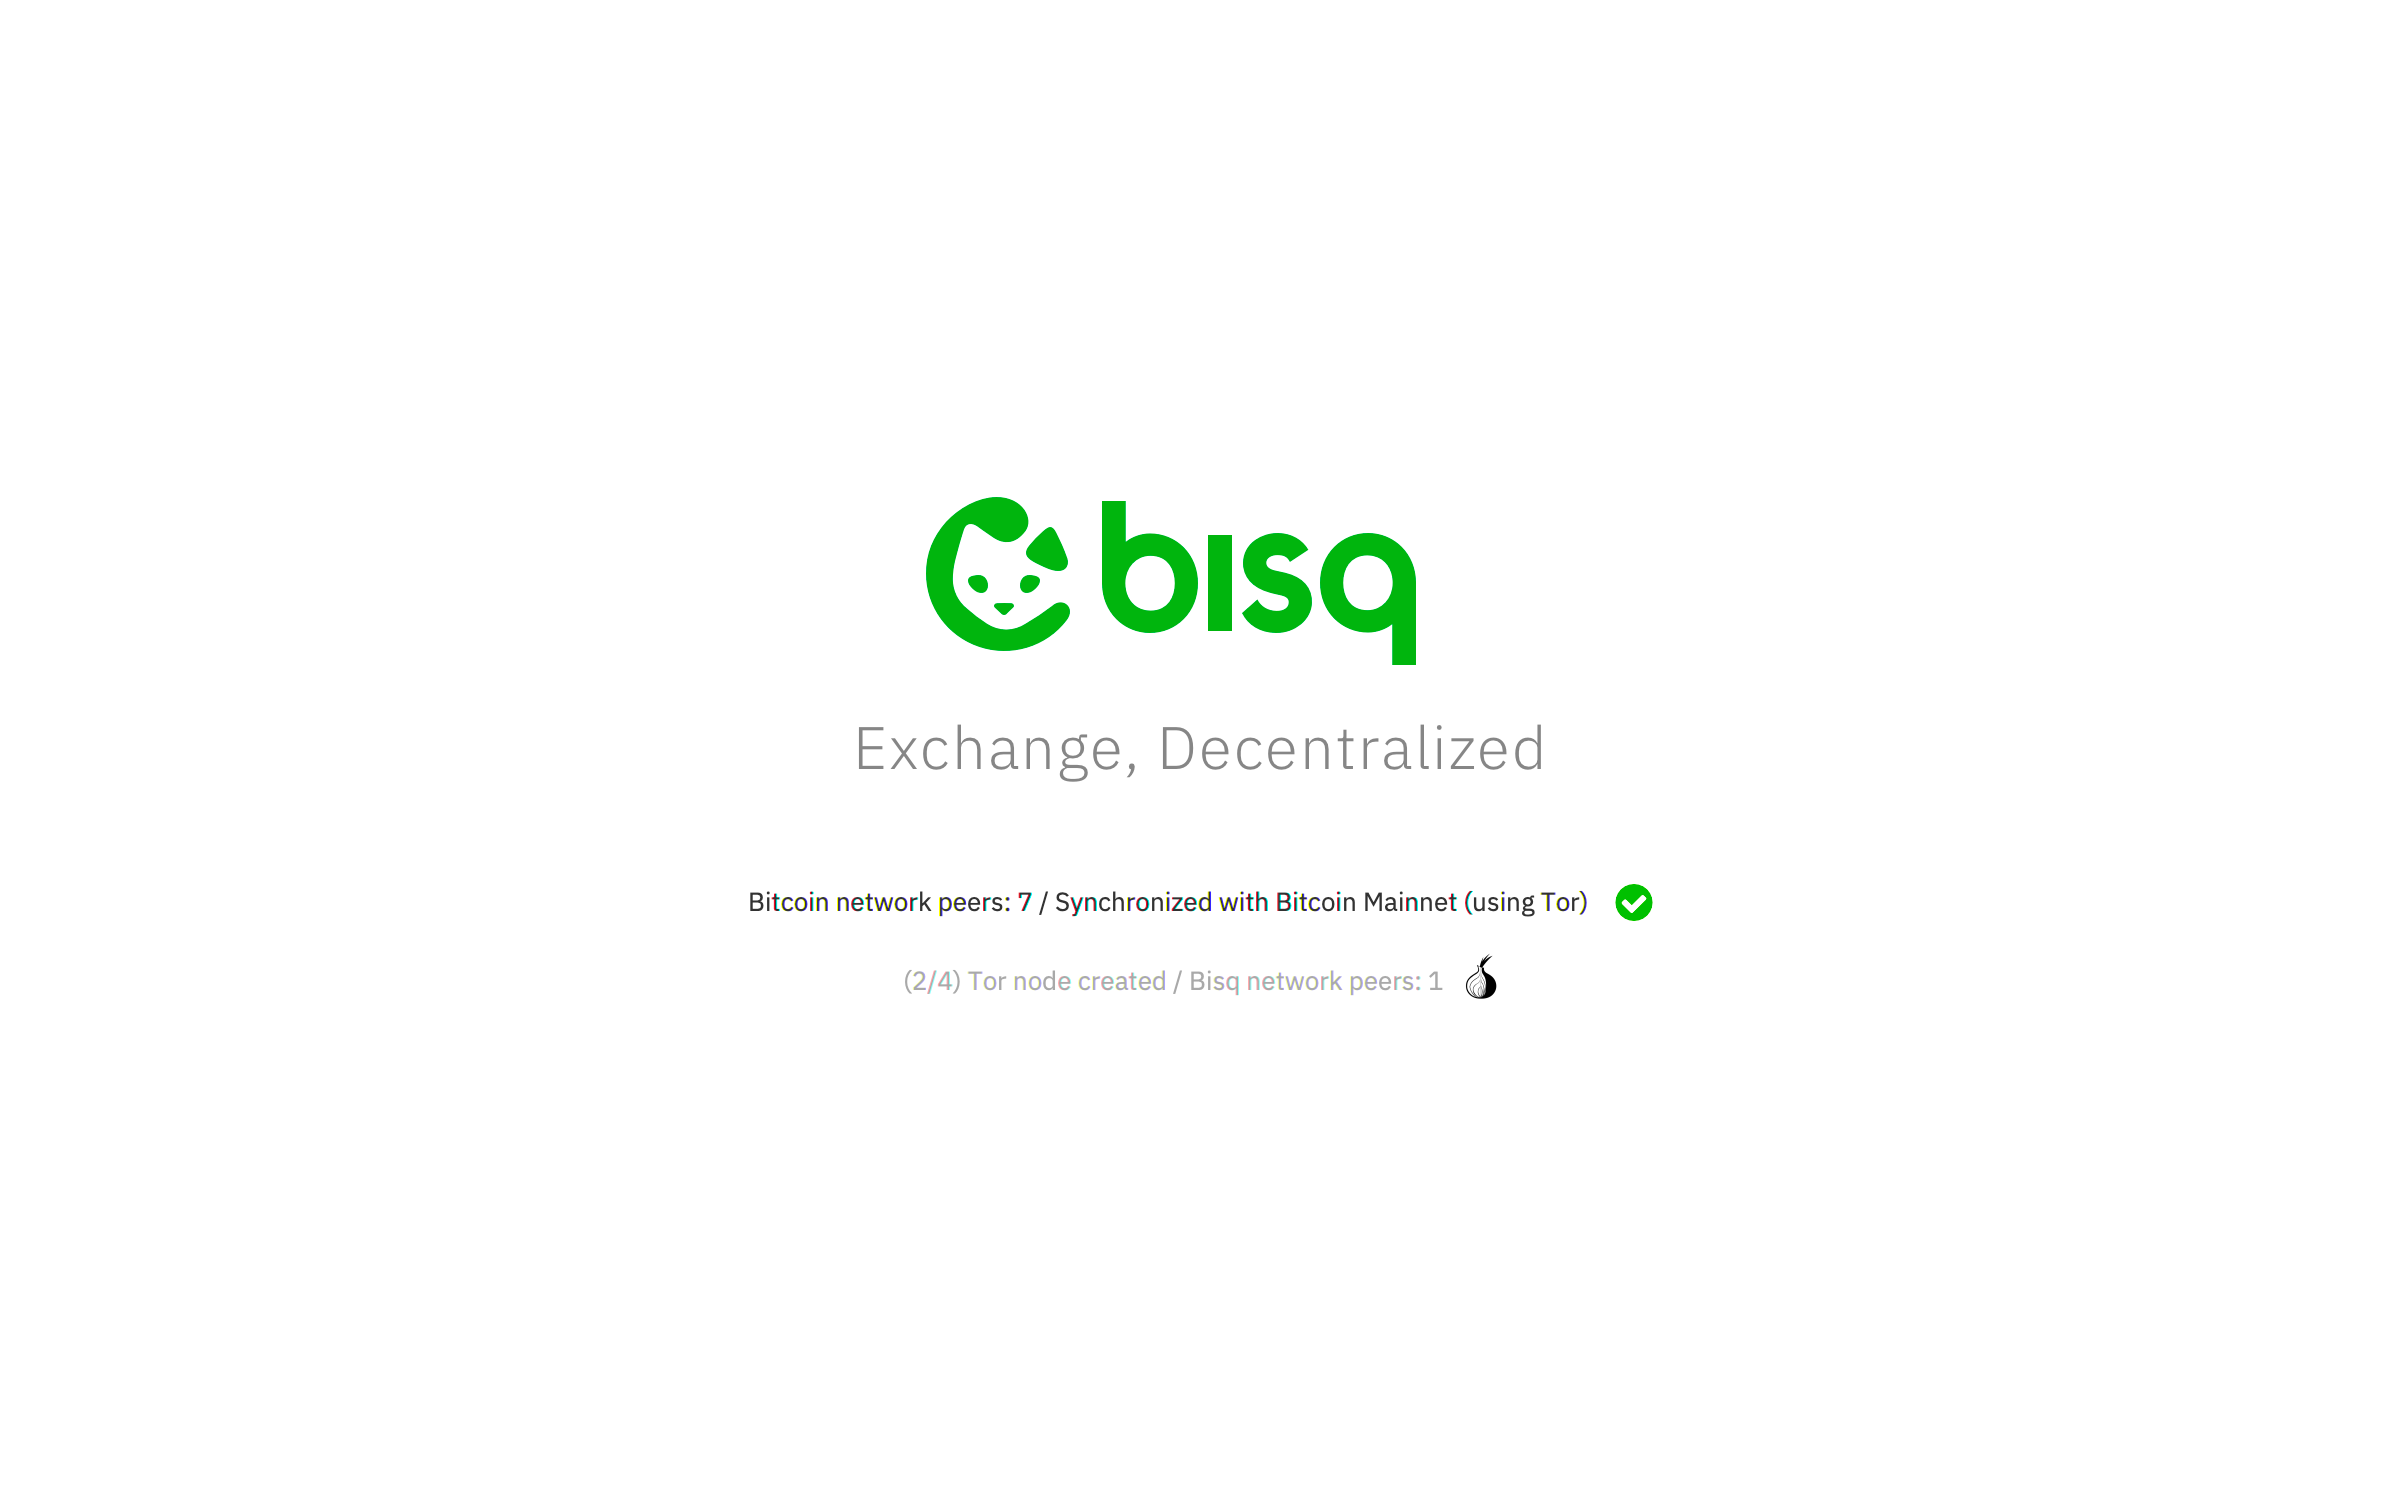 Bisq (Volume $ M): Volume Prices and trading pairs available >> Stelareum